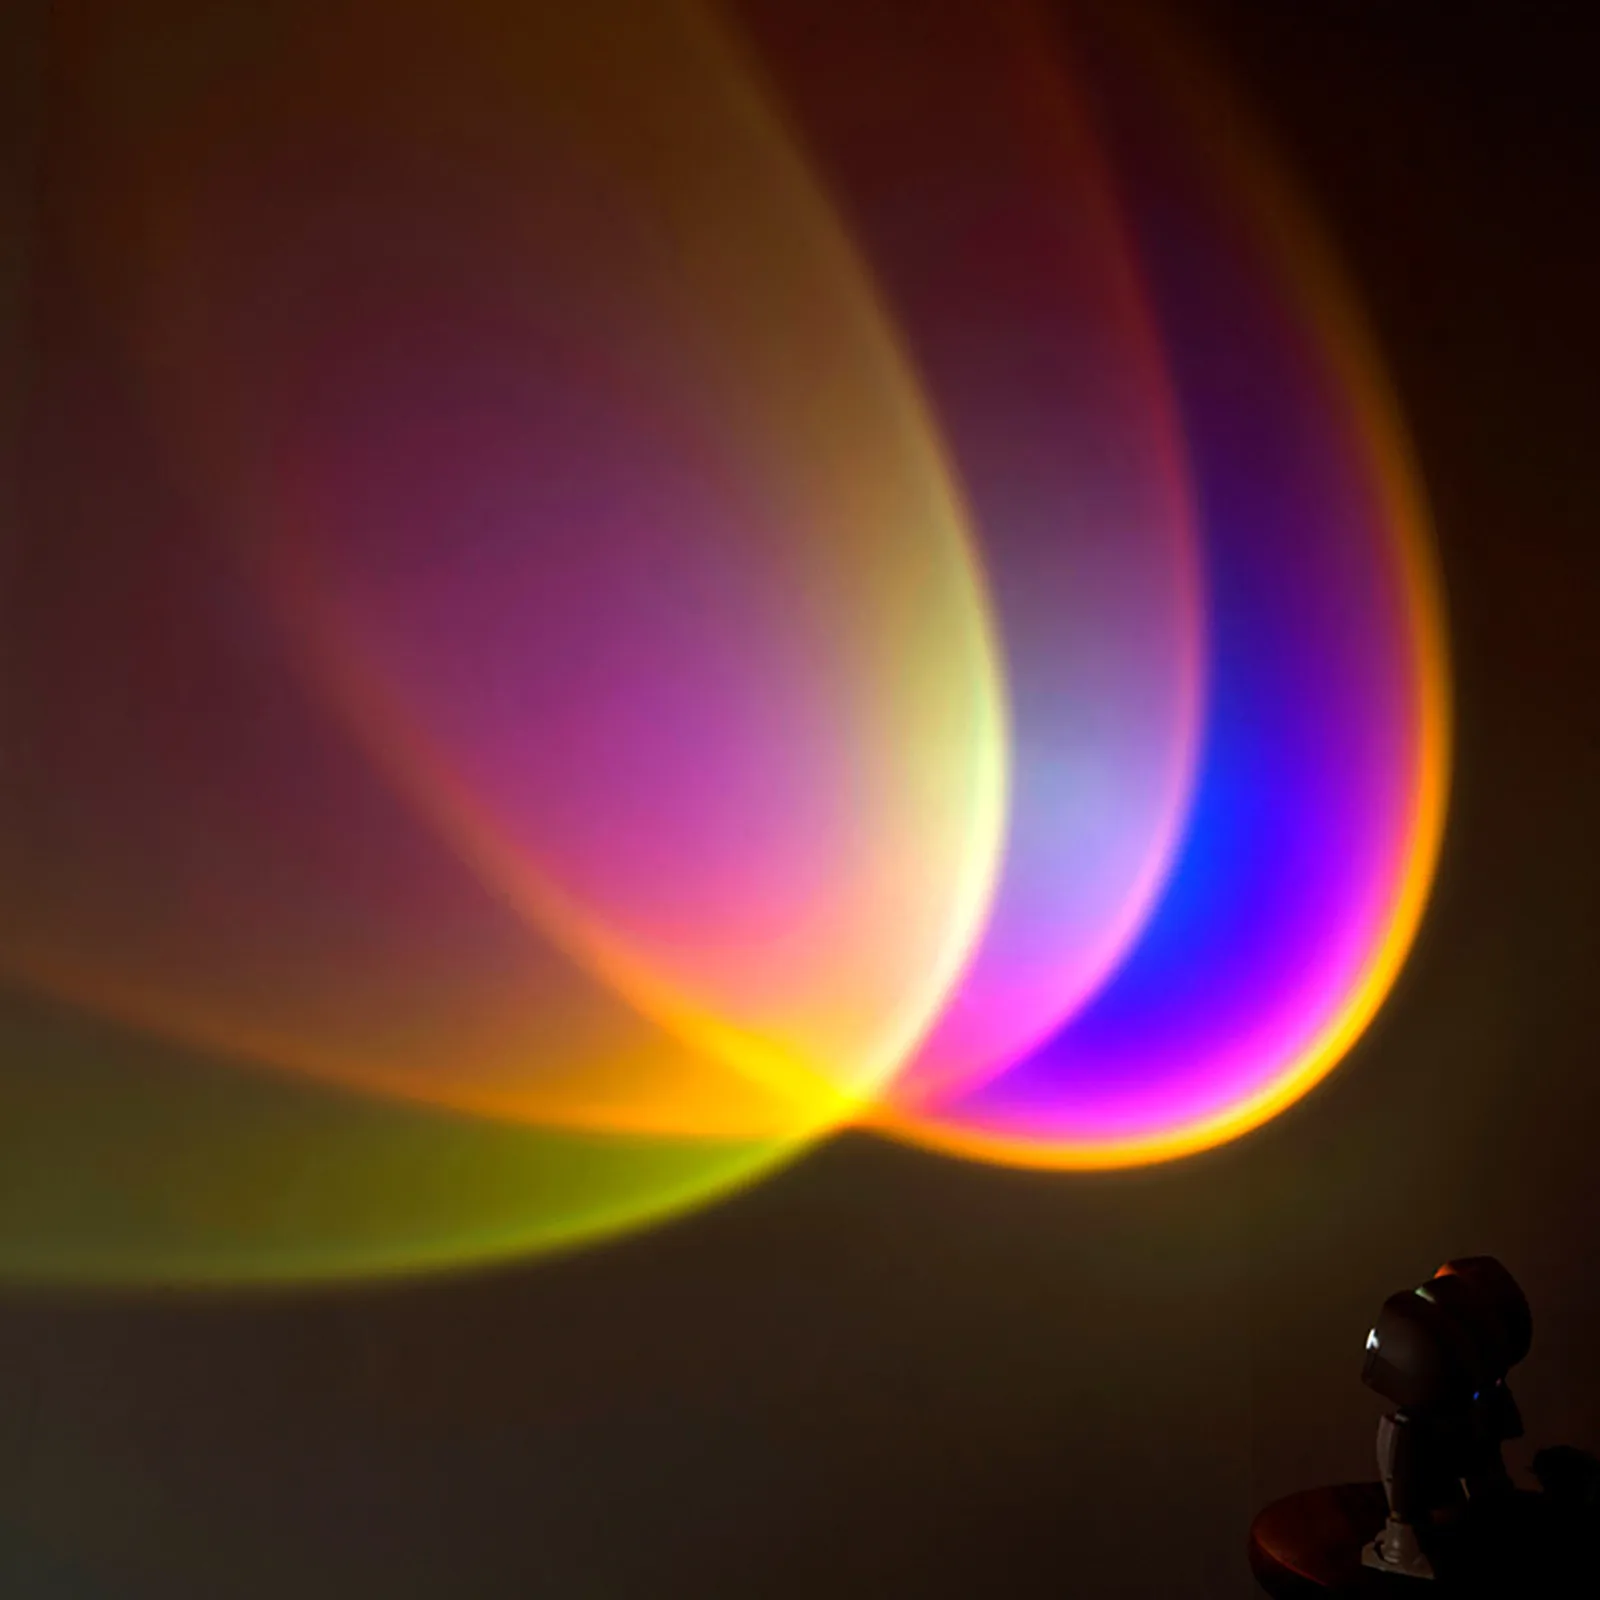 40#sunset Projector Lamp Rainbow Astronaut Atmosphere Led Night Light Home Bedroom Coffe Shop Wall Decoration Usb Table Lamp